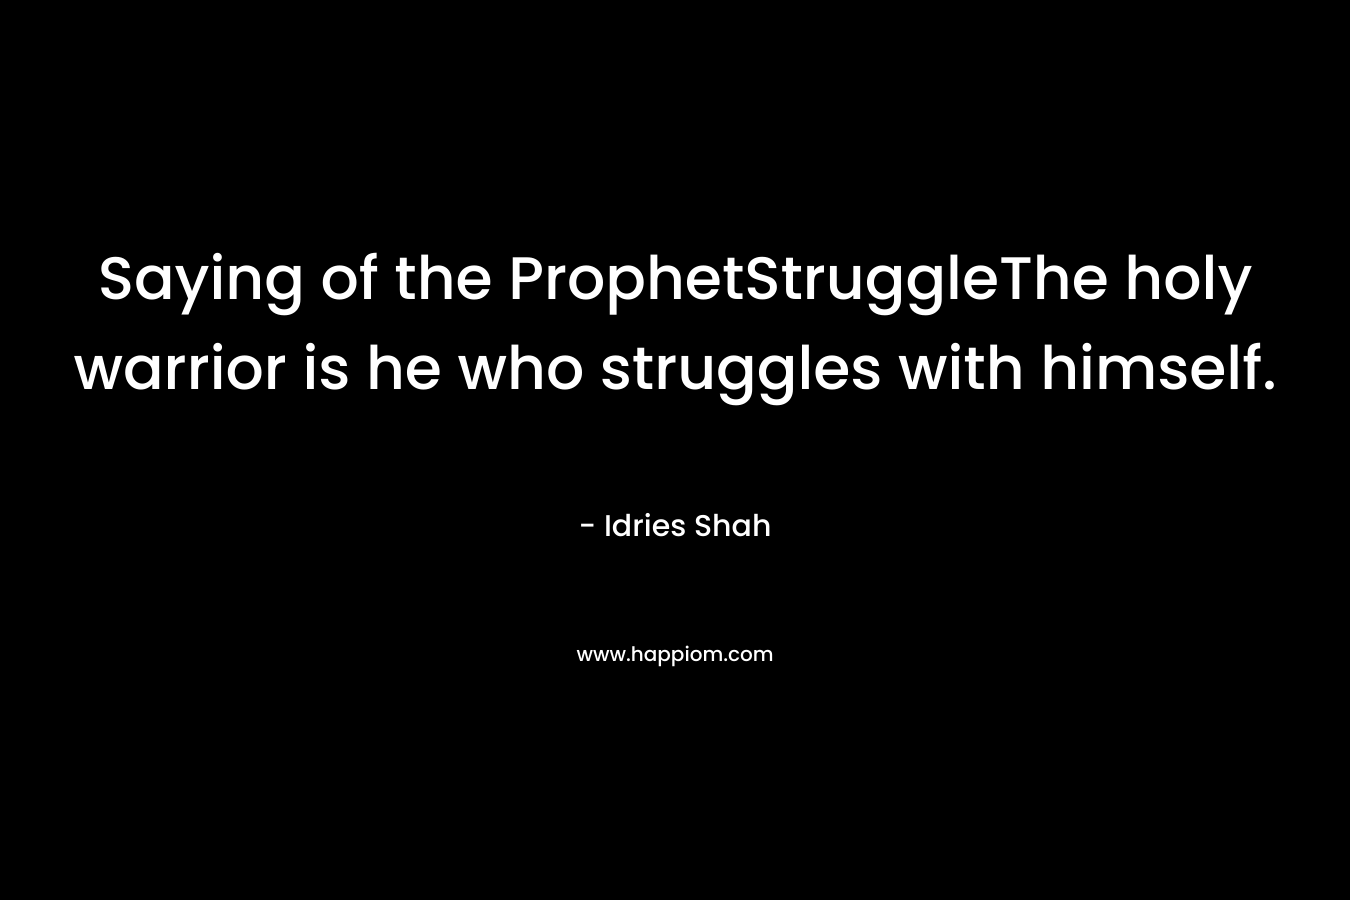 Saying of the ProphetStruggleThe holy warrior is he who struggles with himself. – Idries Shah